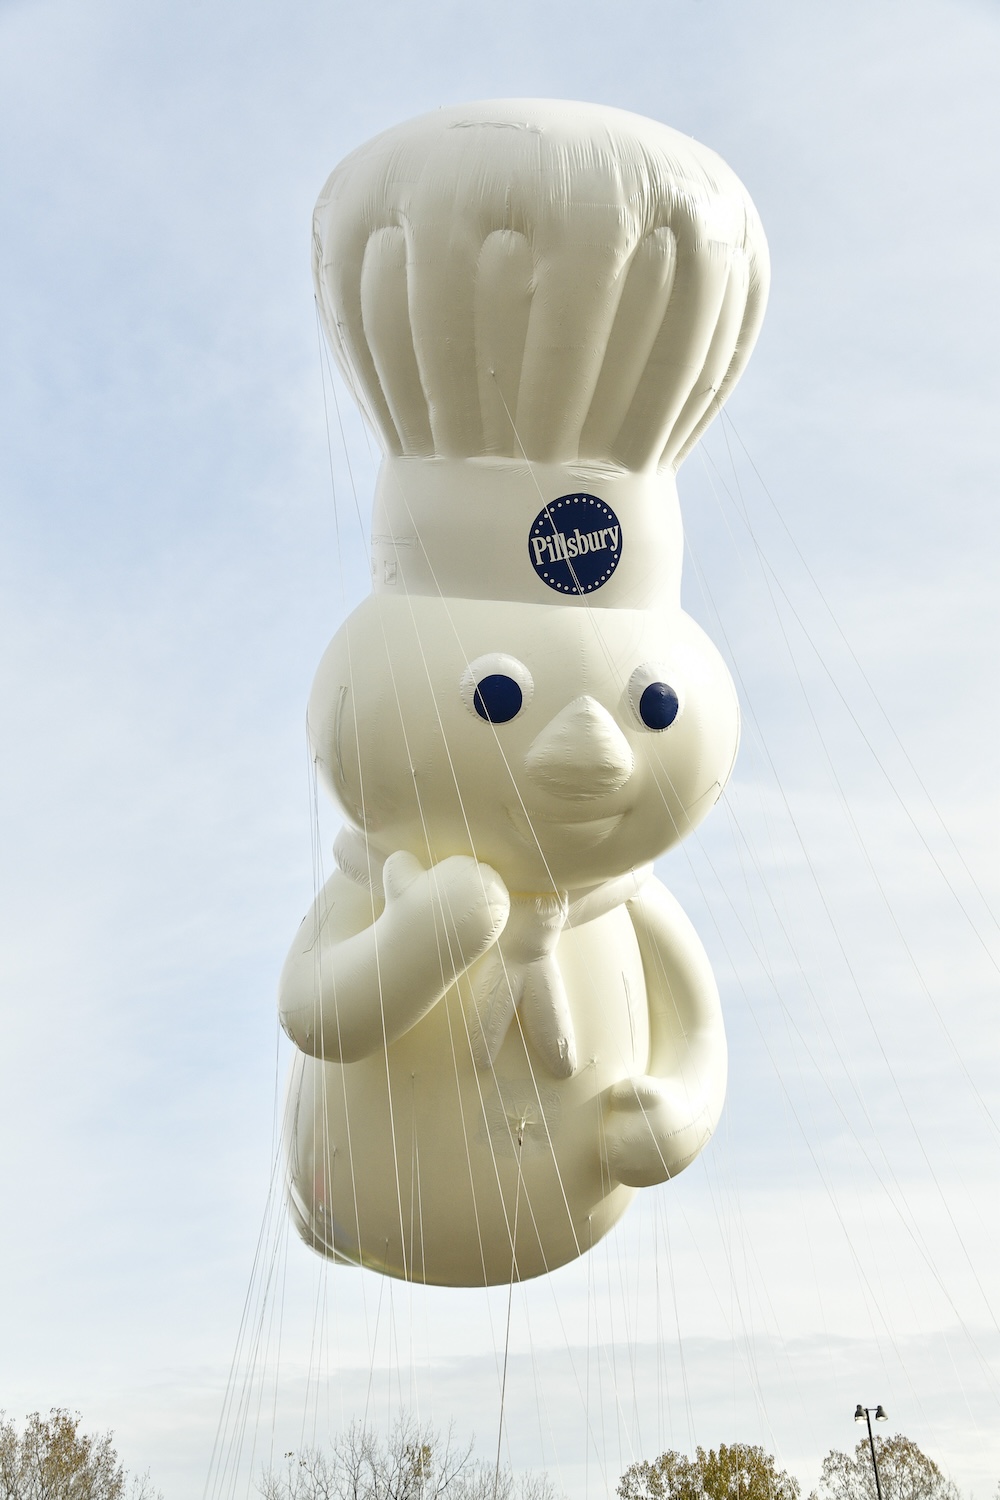 Pillsbury Doughboy in the Macy's Thanksgiving Day Parade